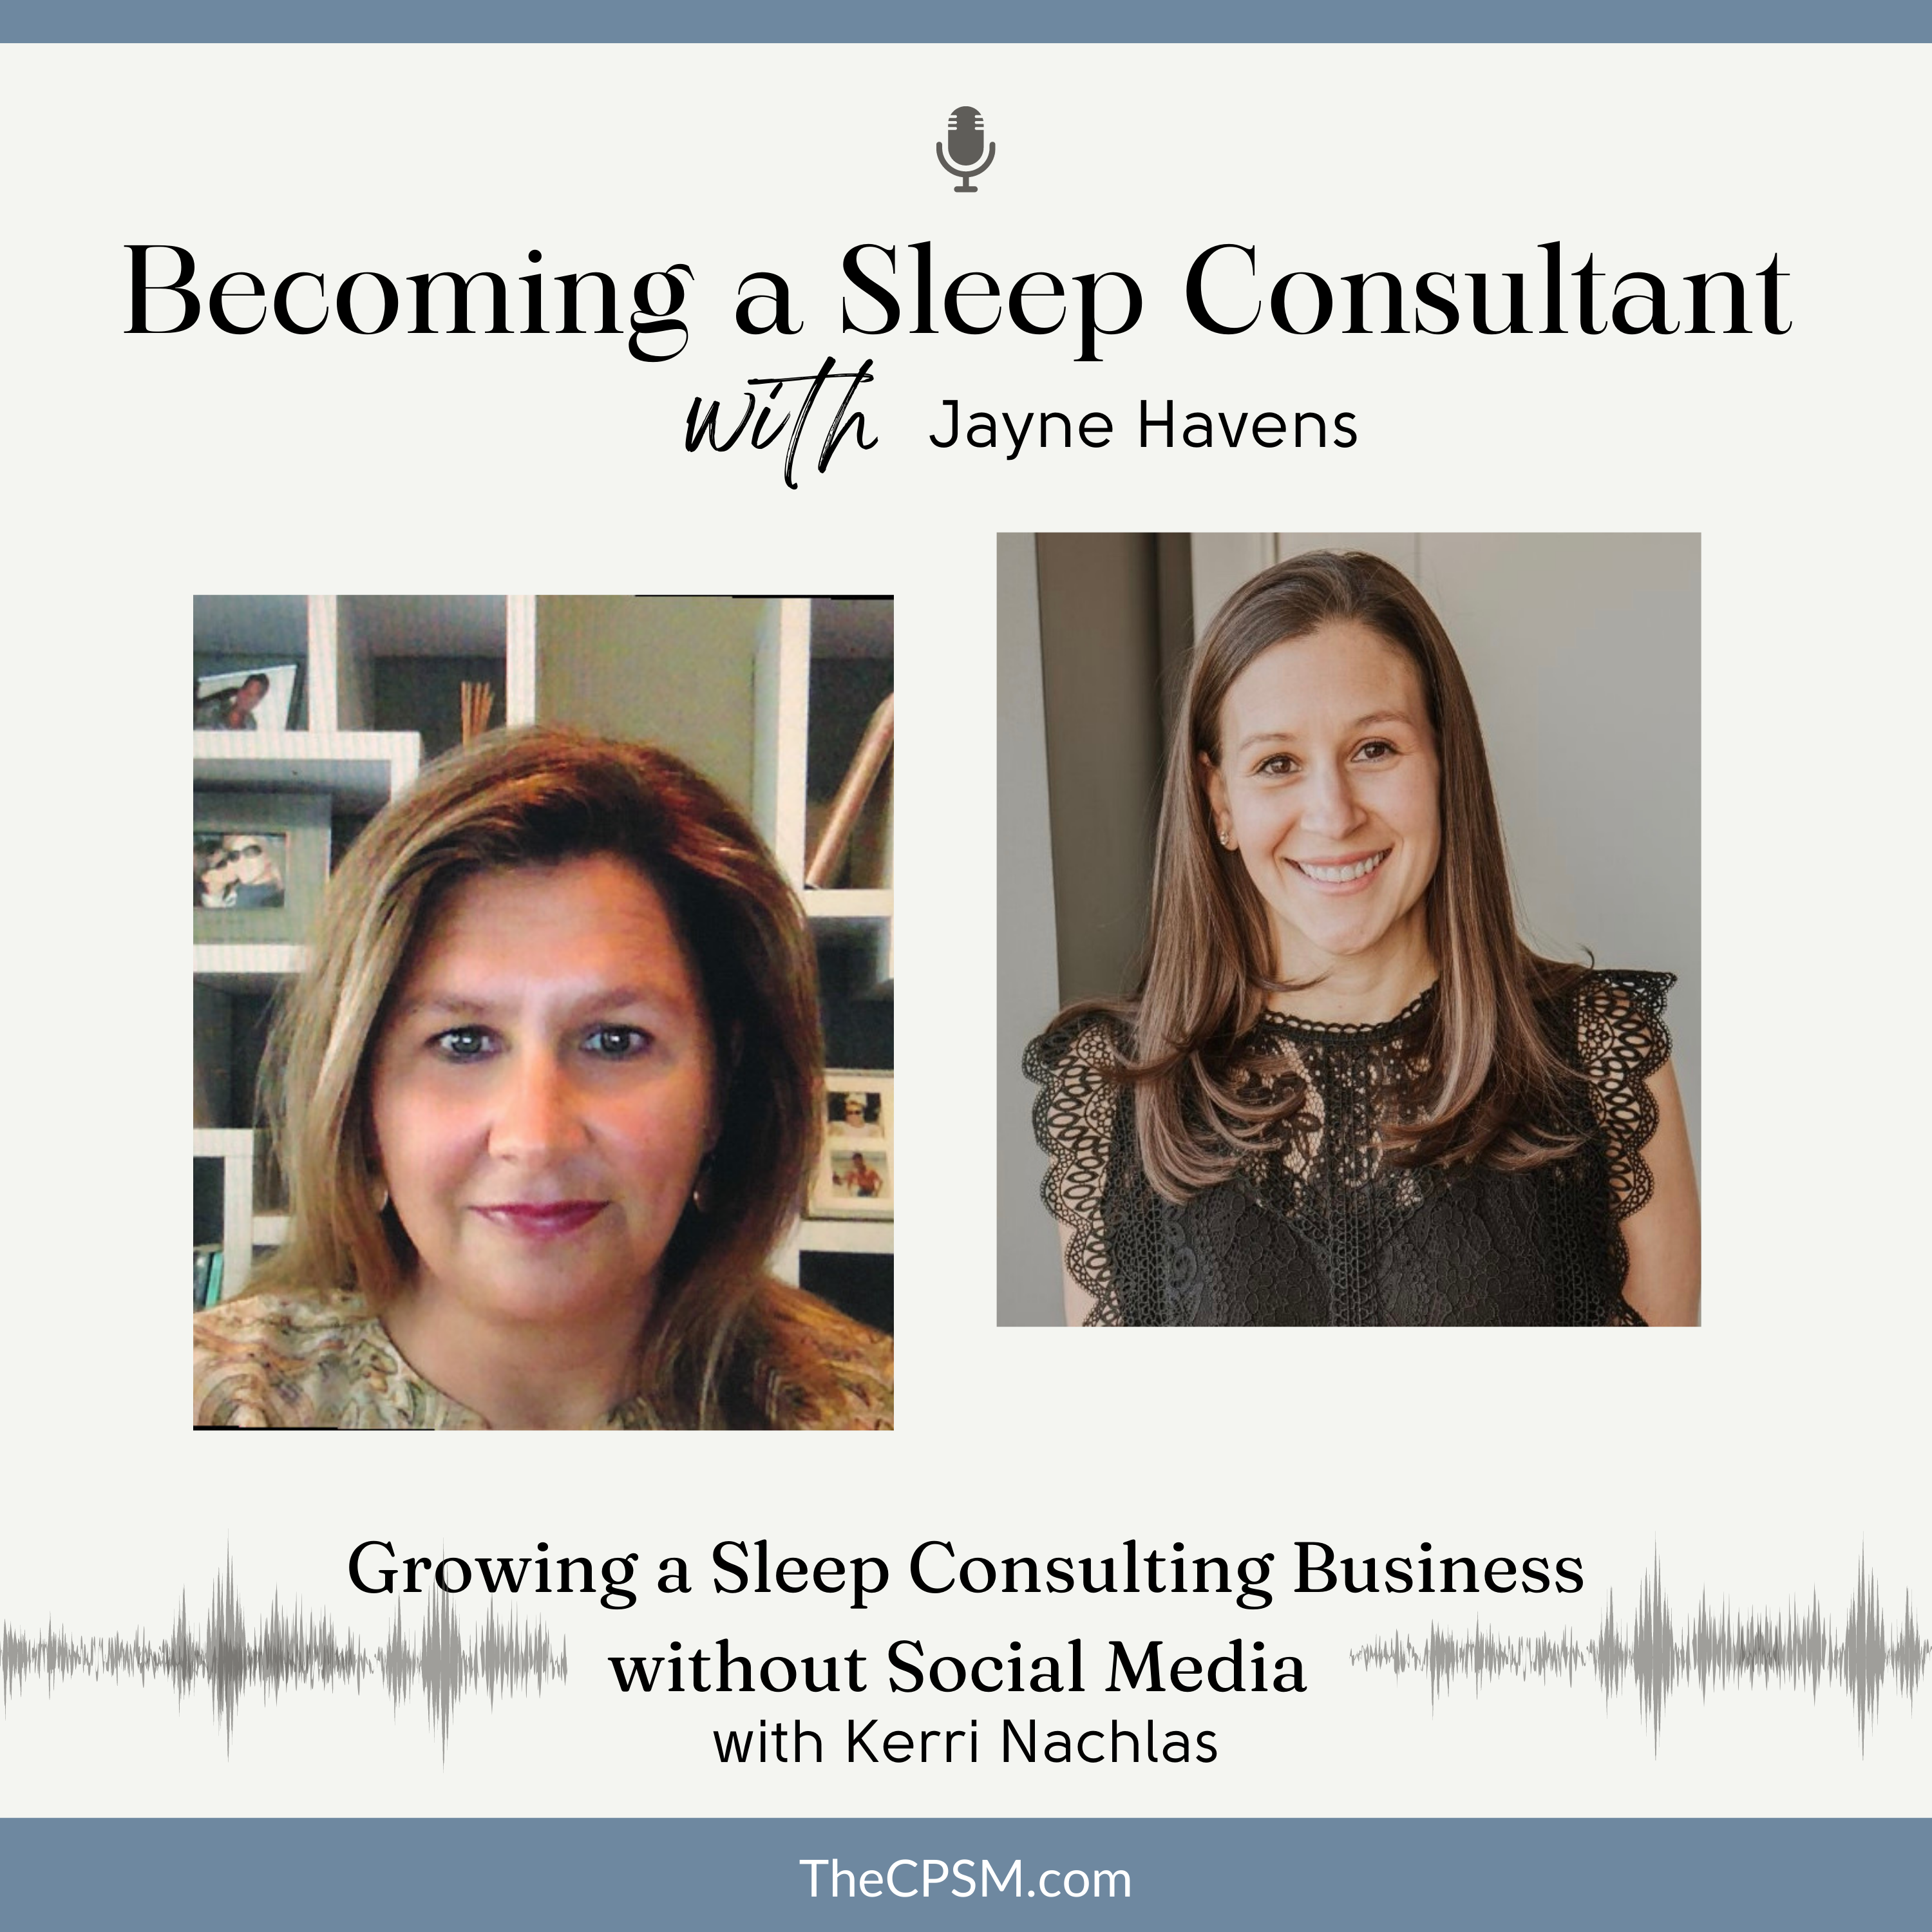 Growing a Sleep Consulting Business without Social Media